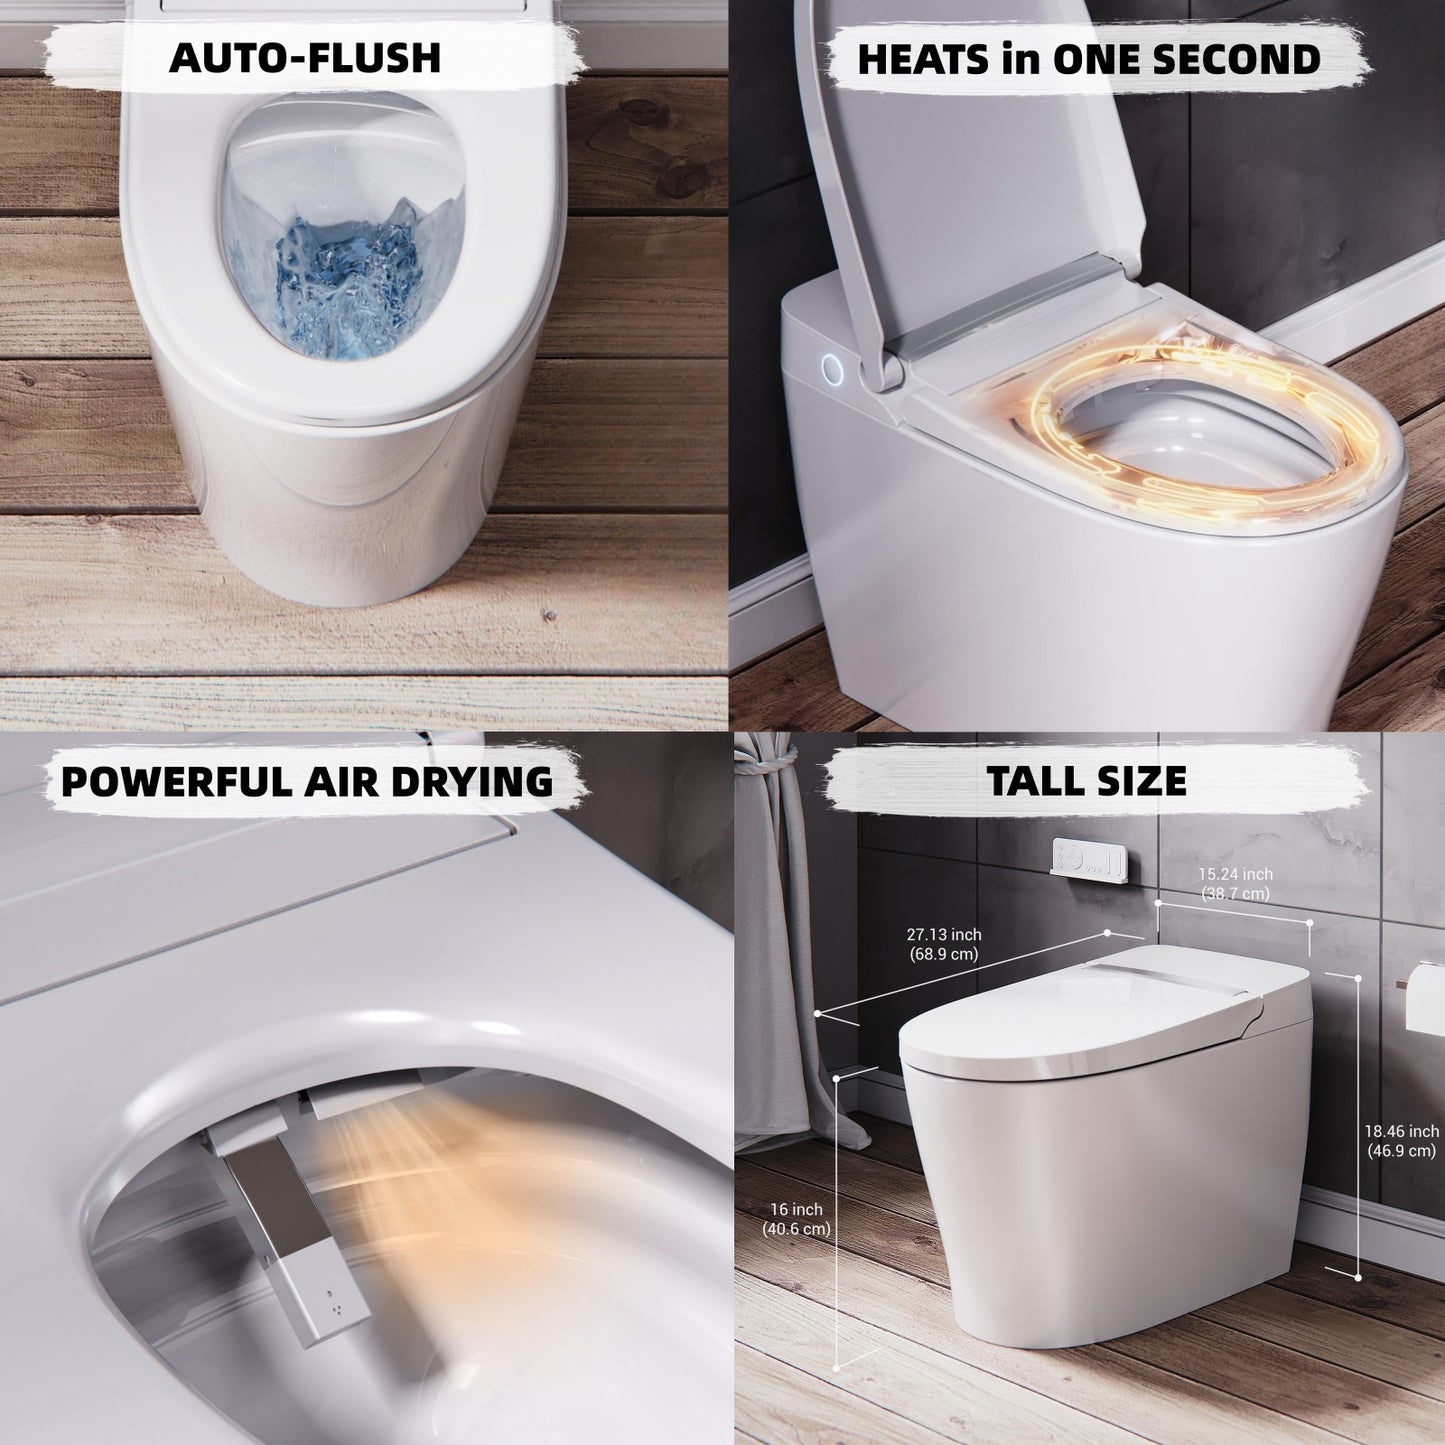 ELLAI Smart Toilet with Bidet Built In, Bidet Toilet with Remote Contr